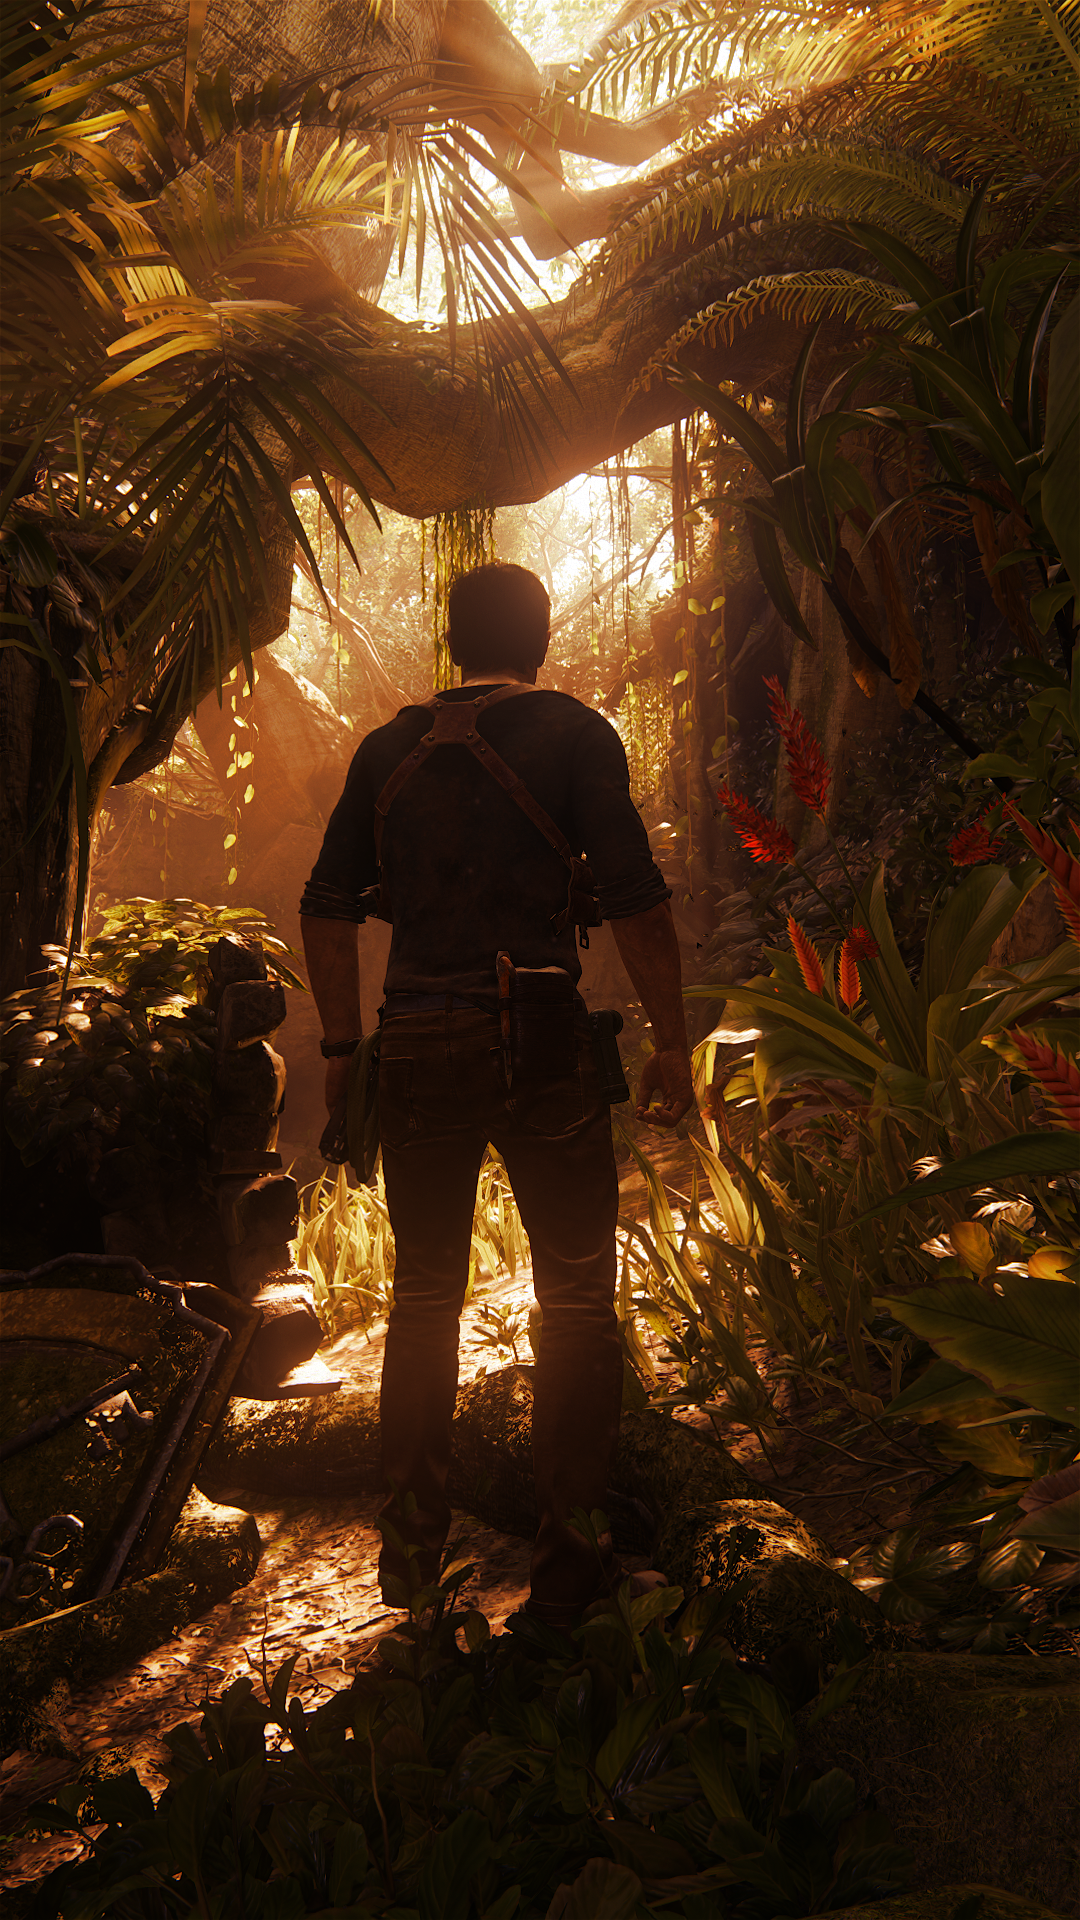 Uncharted Wallpaper Android - HD Wallpaper 